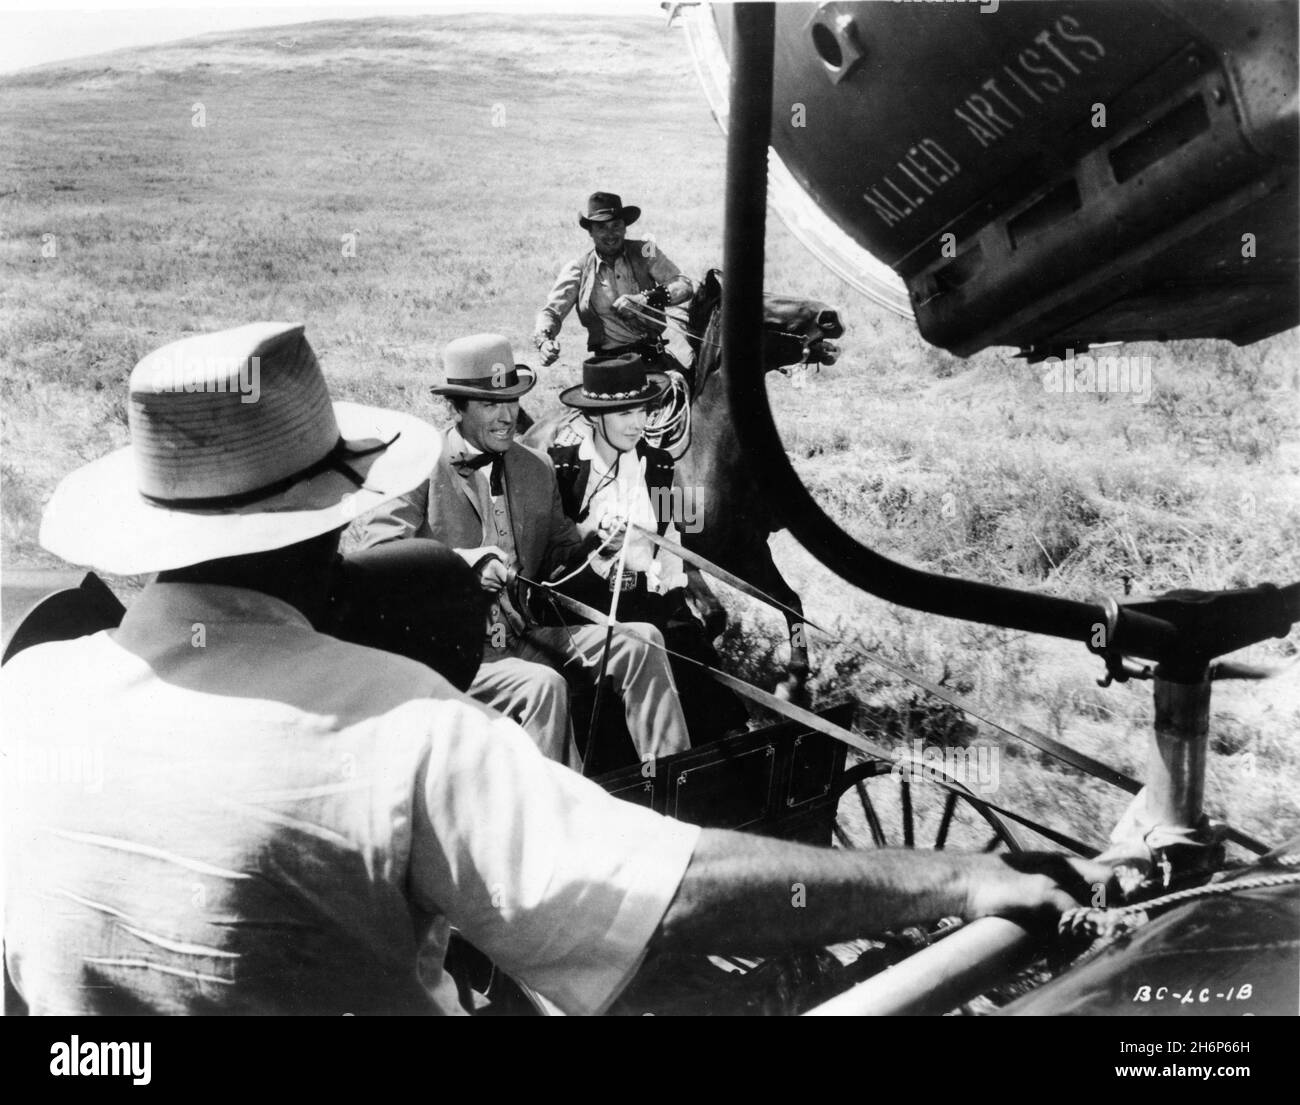 Director WILLIAM WYLER on set location candid filming GREGORY PECK CARROLL BAKER and CHUCK HAYWARD inTHE BIG COUNTRY 1958 director WILLIAM WYLER novel Donald Hamilton music Jerome Moross producers Gregory Peck and William Wyler Anthony - Worldwide Productions / United Artists Stock Photo